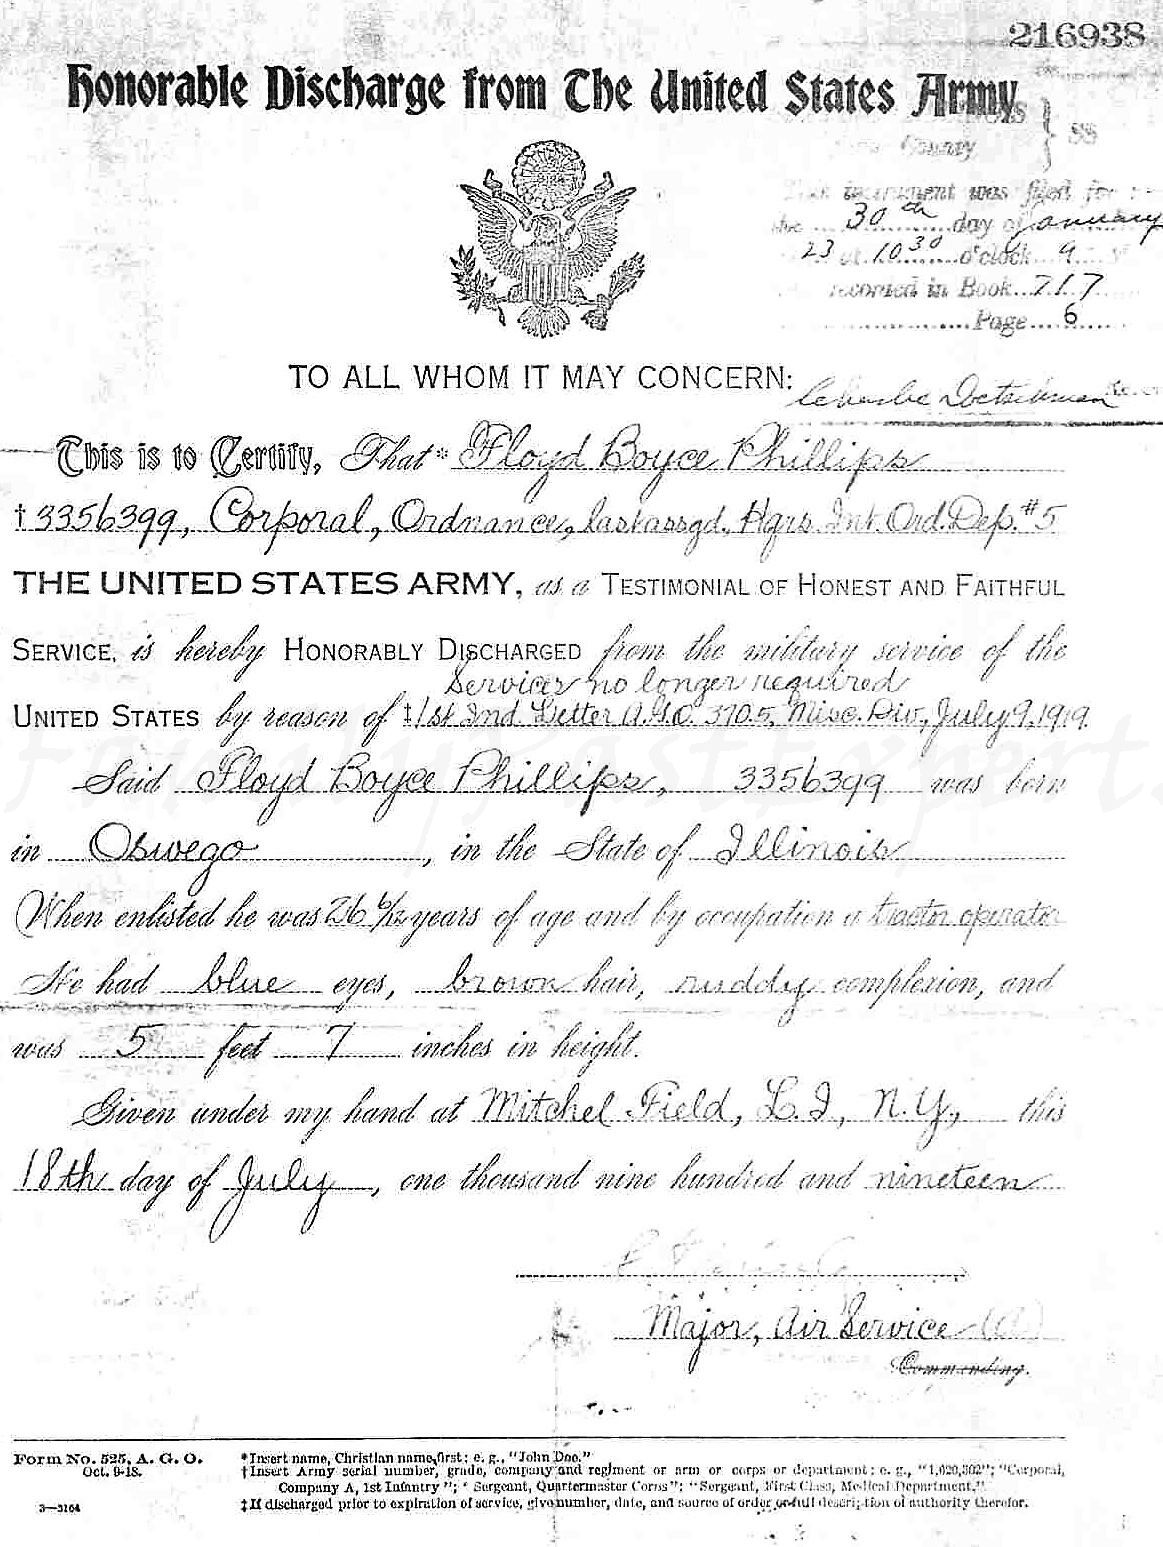 18 July 1919 Honorable Discharge